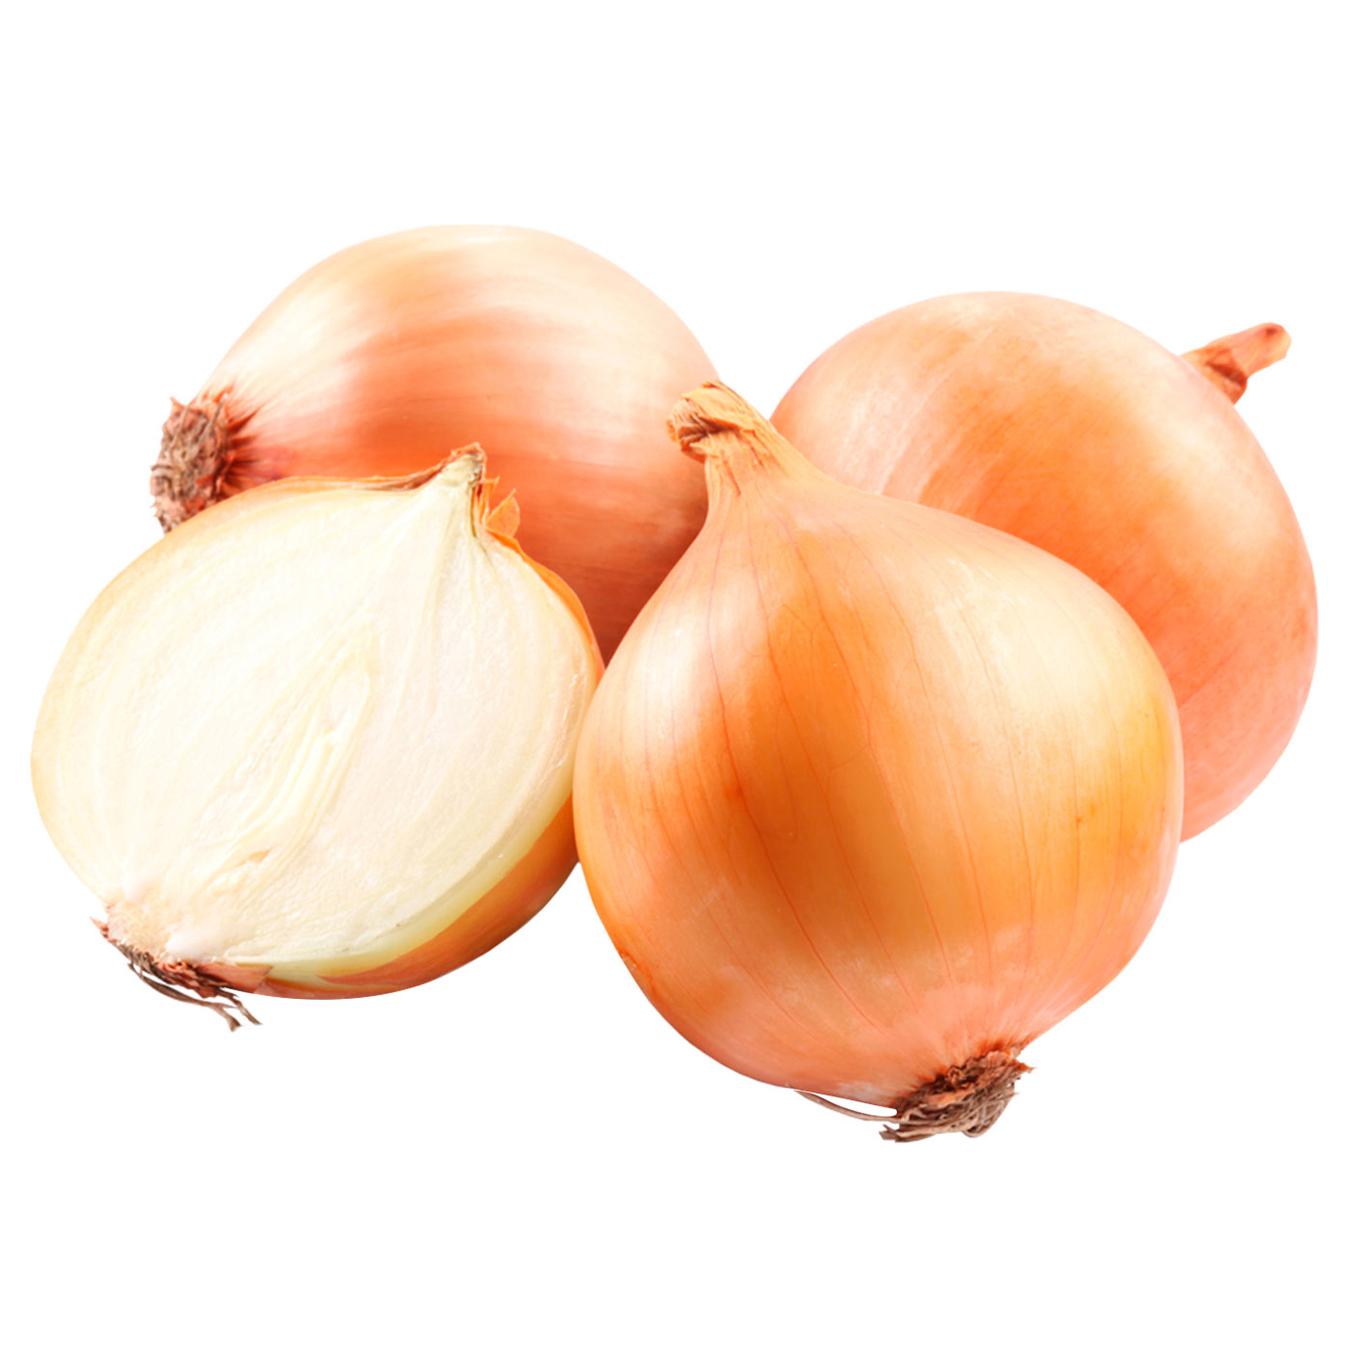 Young turnip onions